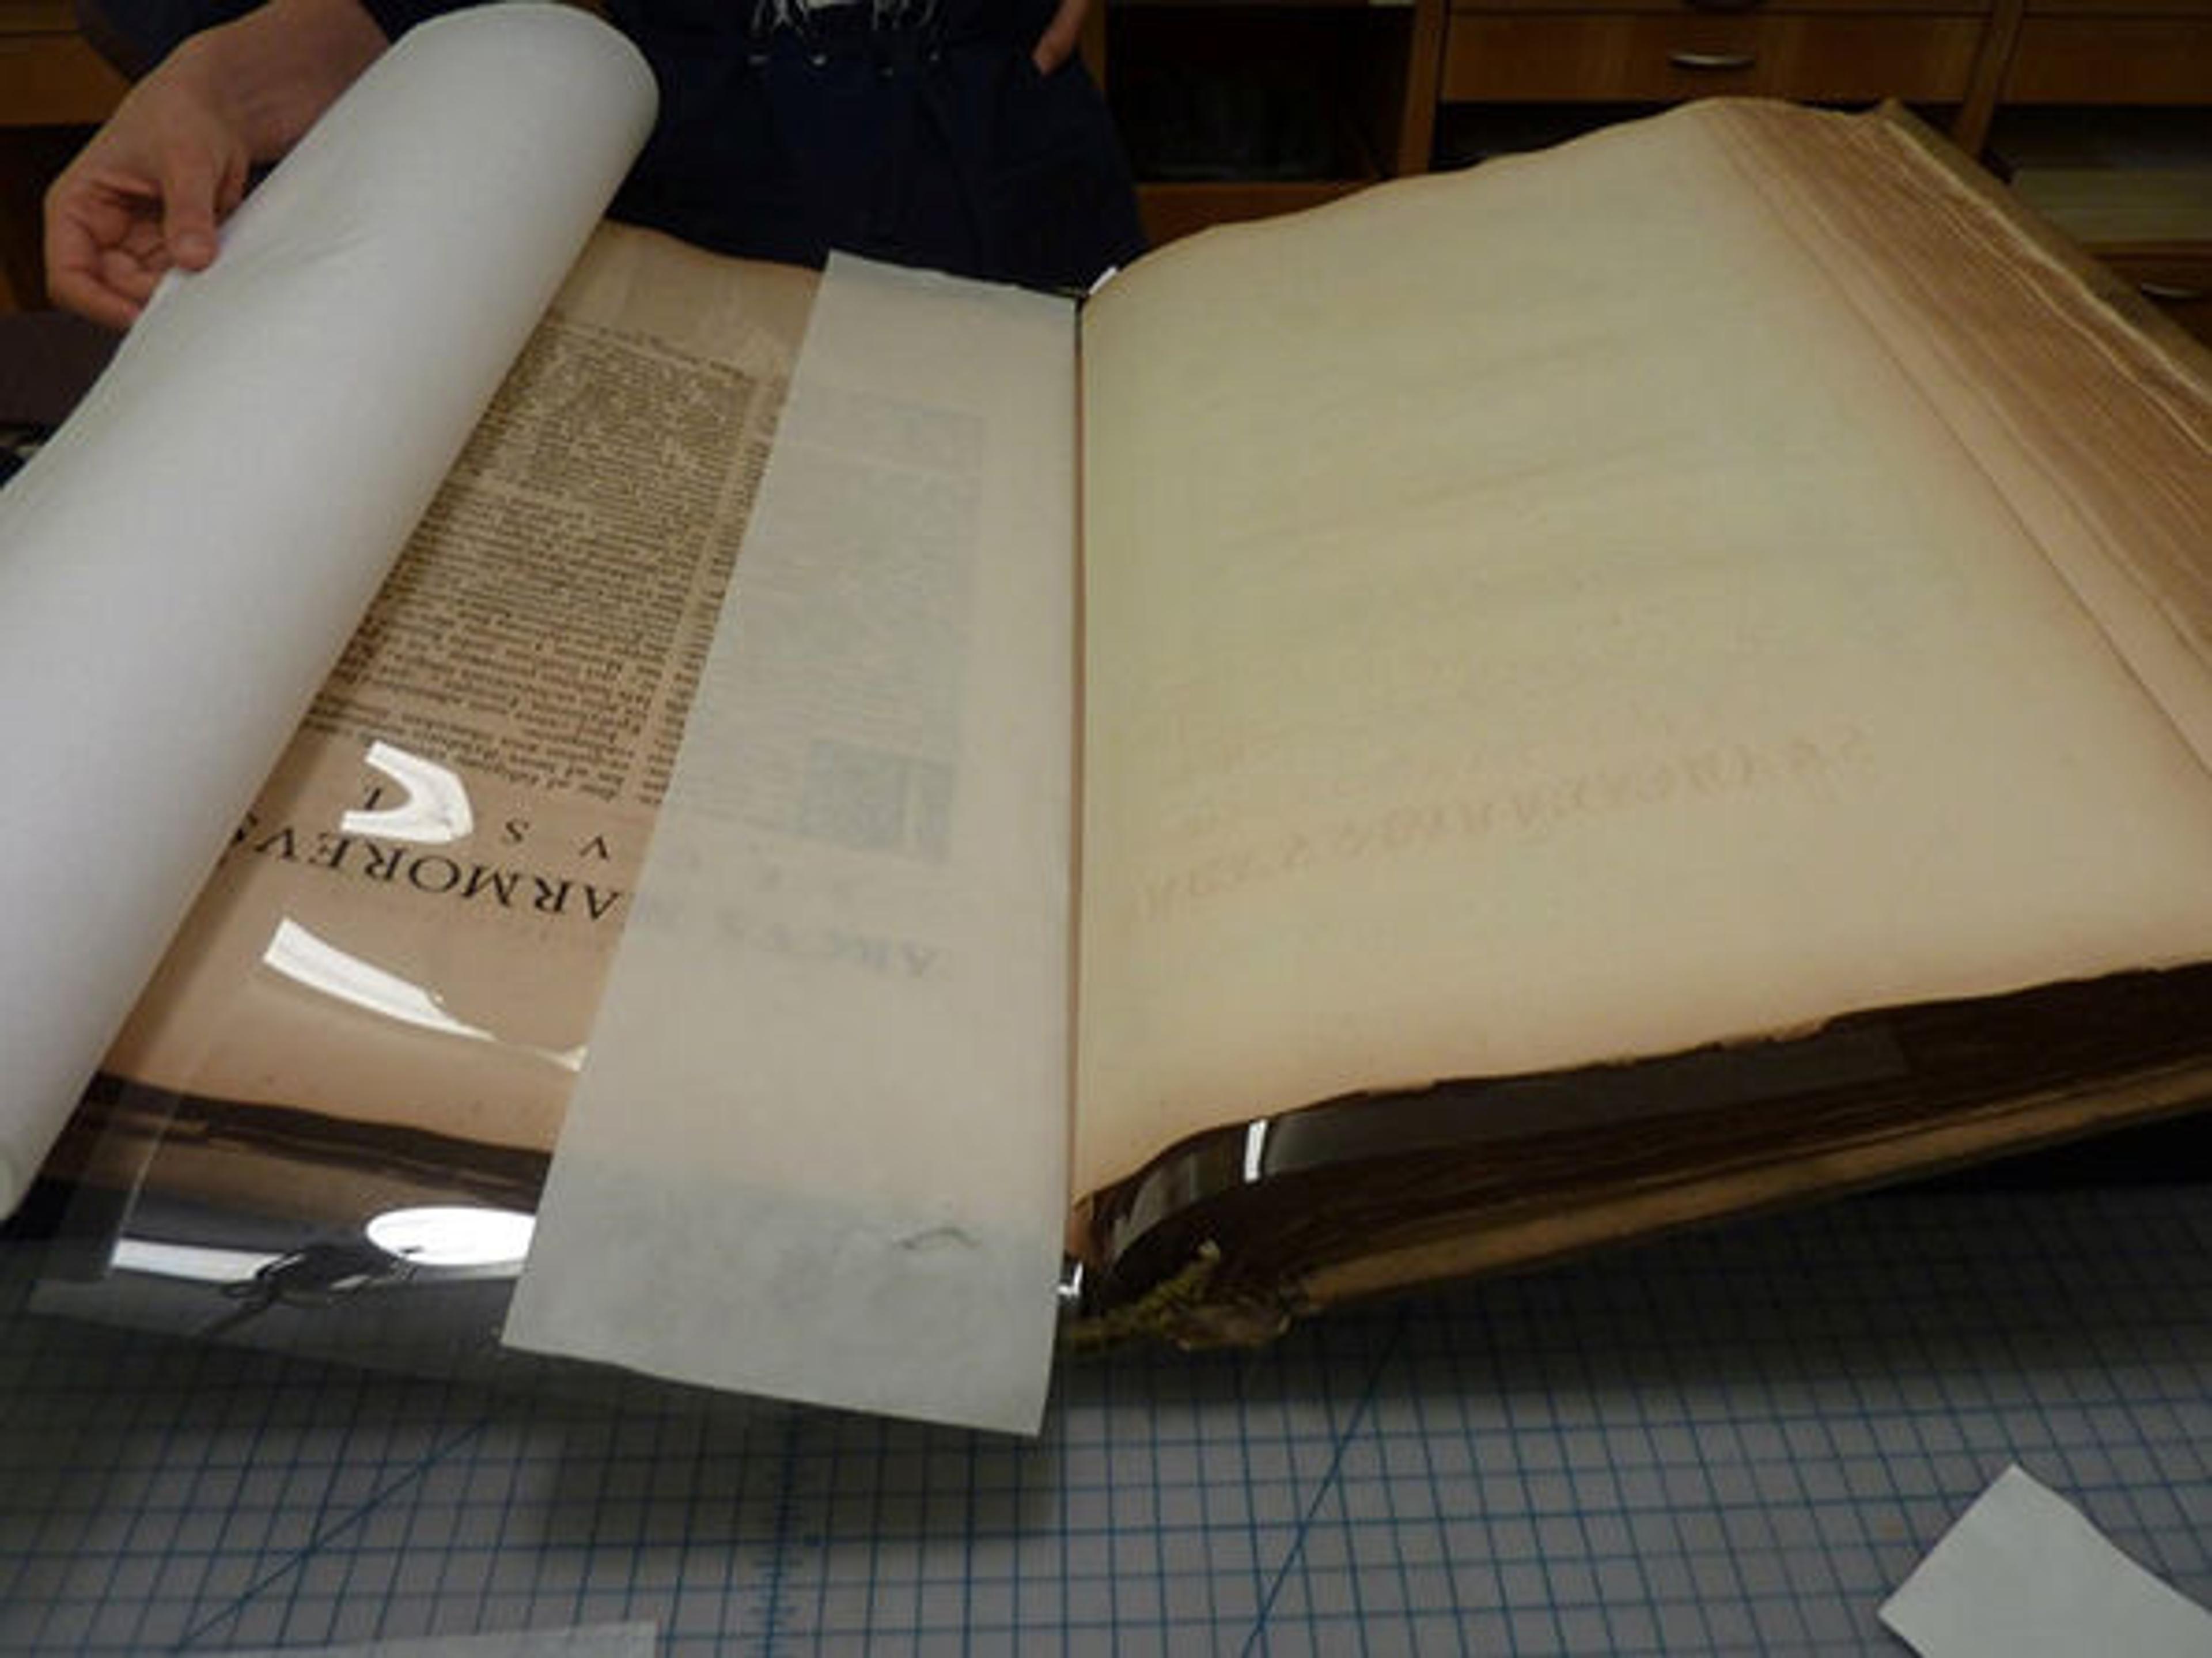 Final touches of book conservation